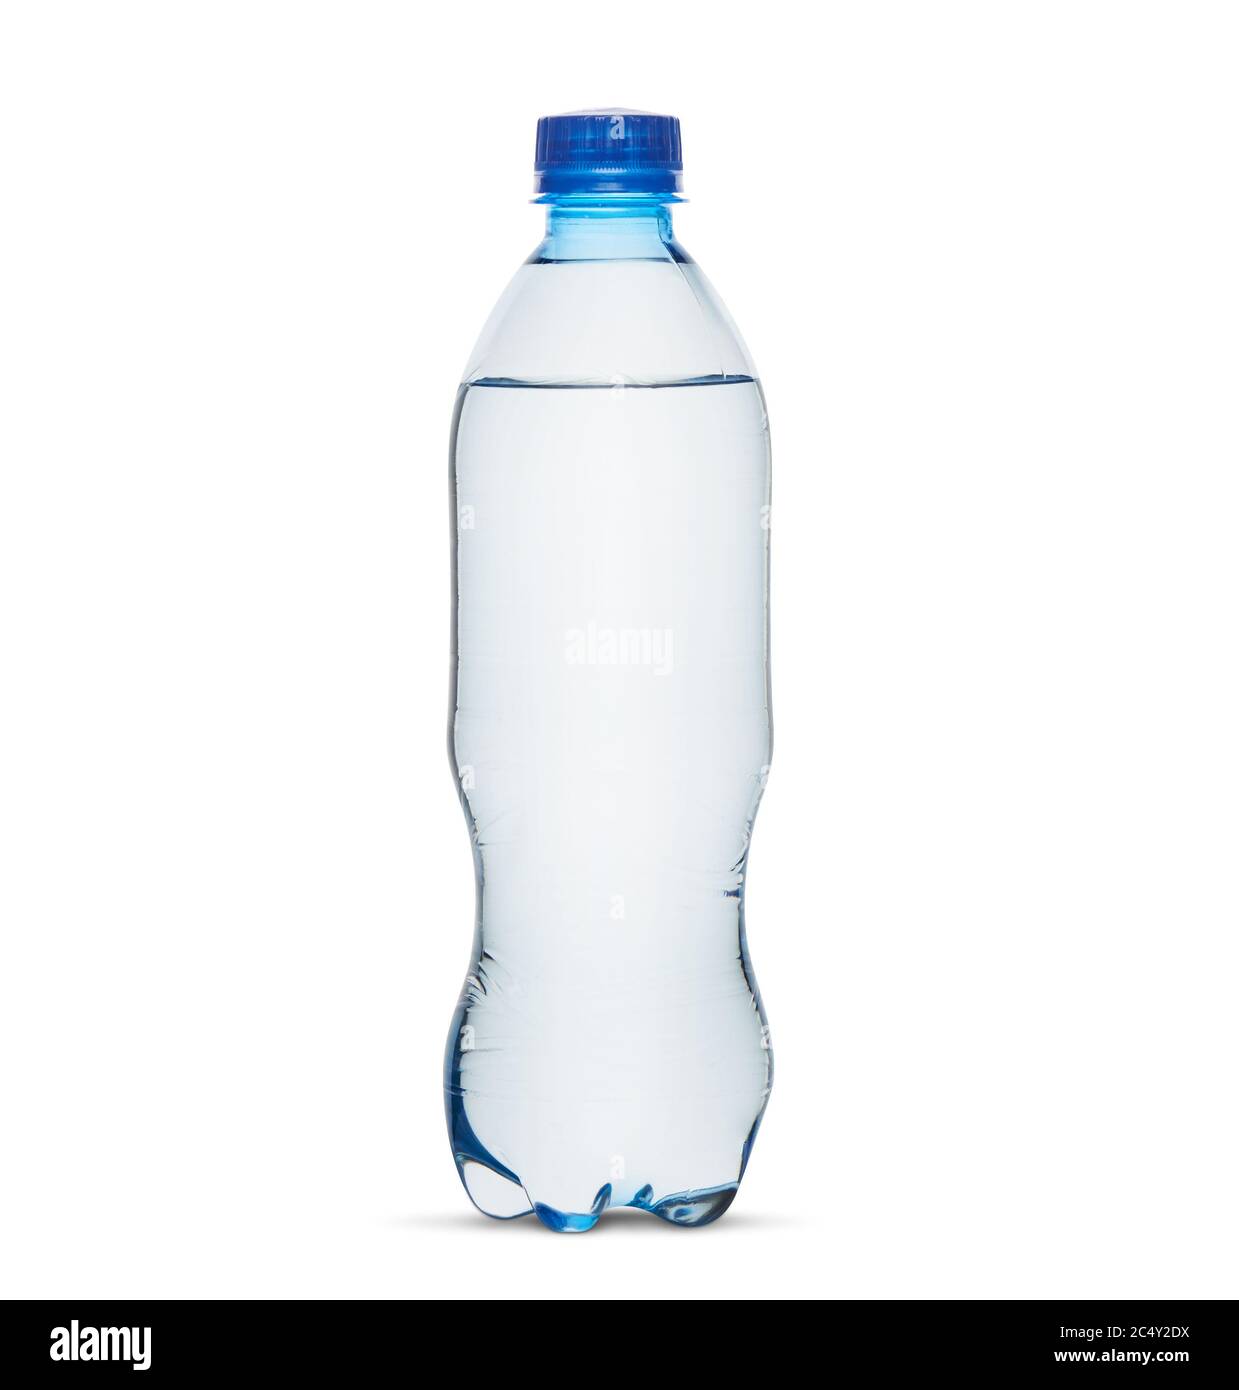 https://c8.alamy.com/comp/2C4Y2DX/small-water-bottle-isolated-on-white-with-clipping-path-2C4Y2DX.jpg